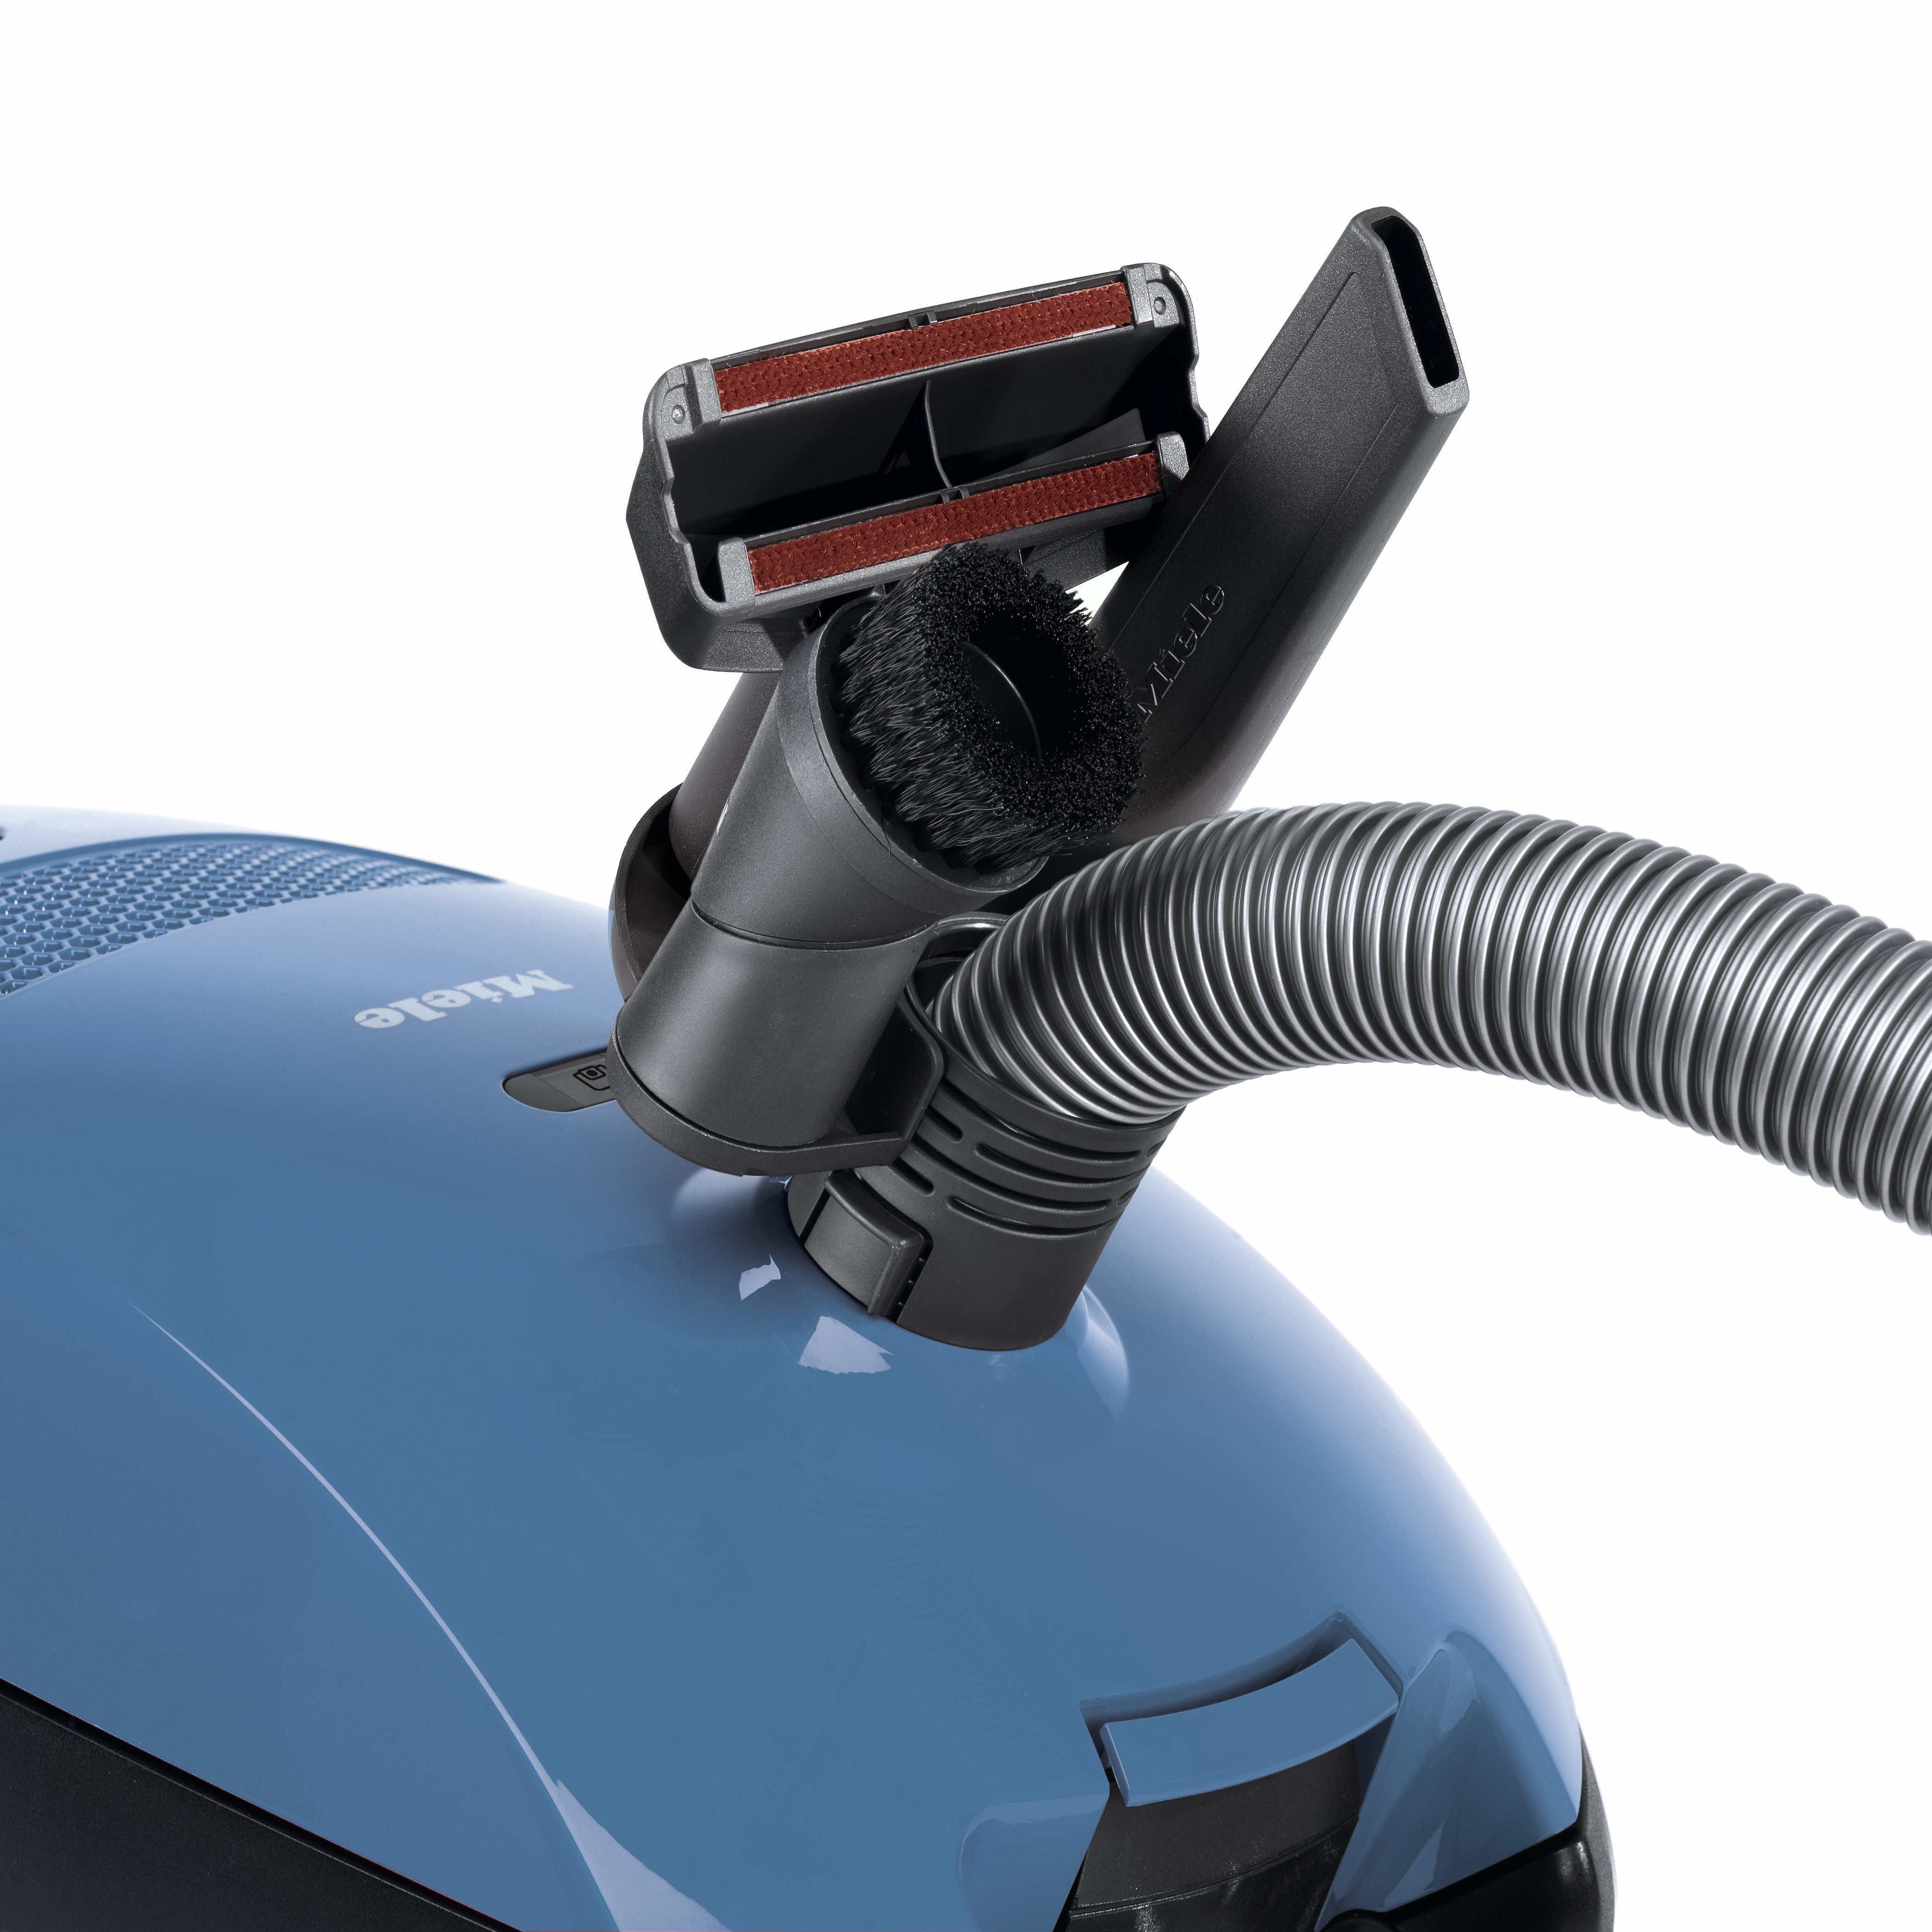 Miele Classic C1 TurboTeam PowerLine Canister Vacuum